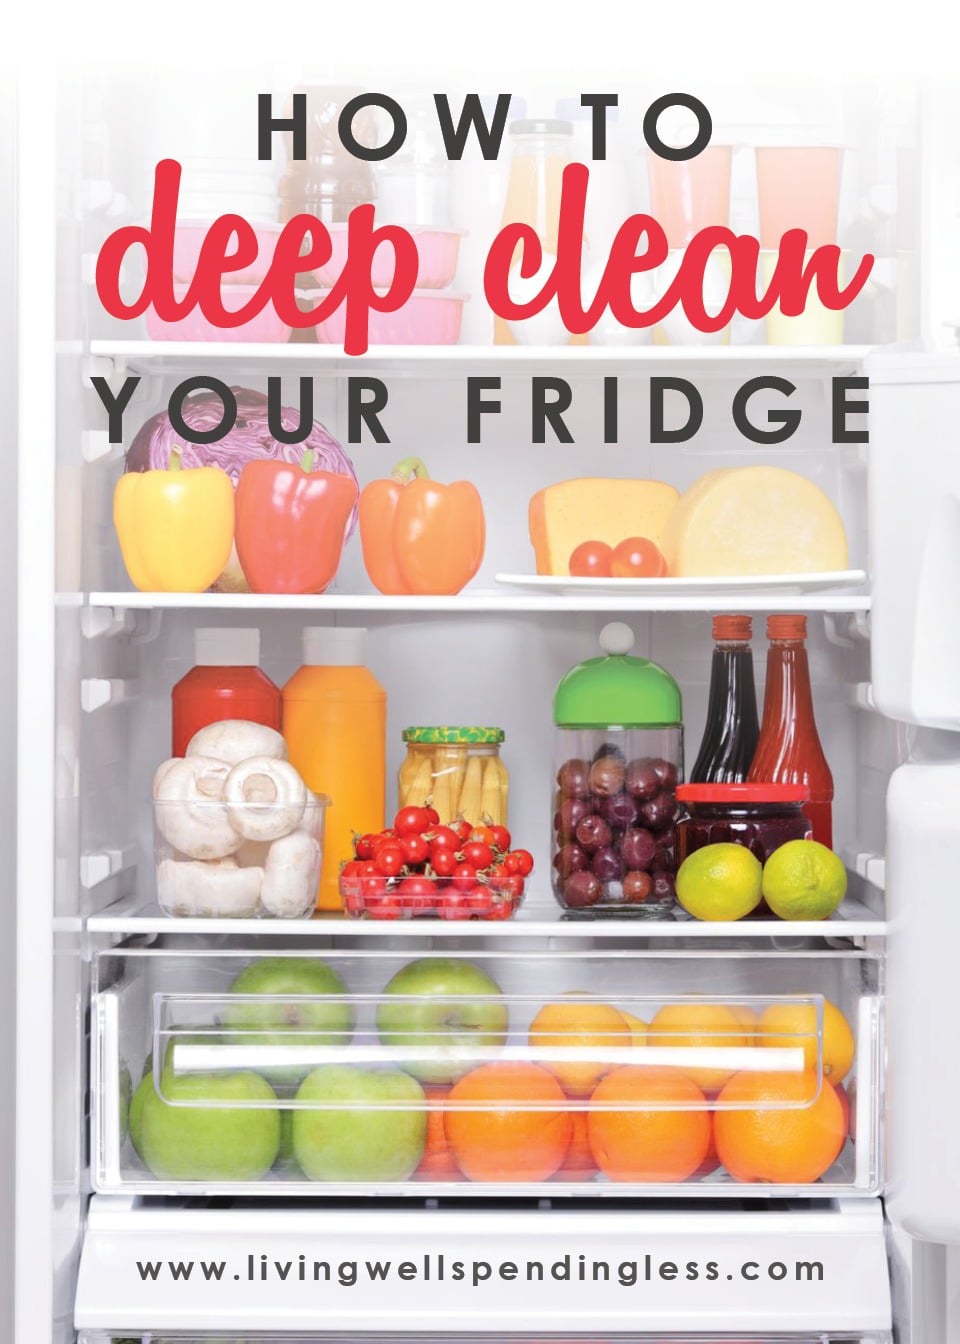 How to Deep Clean Your Fridge | How to Have a Clean Refrigerator